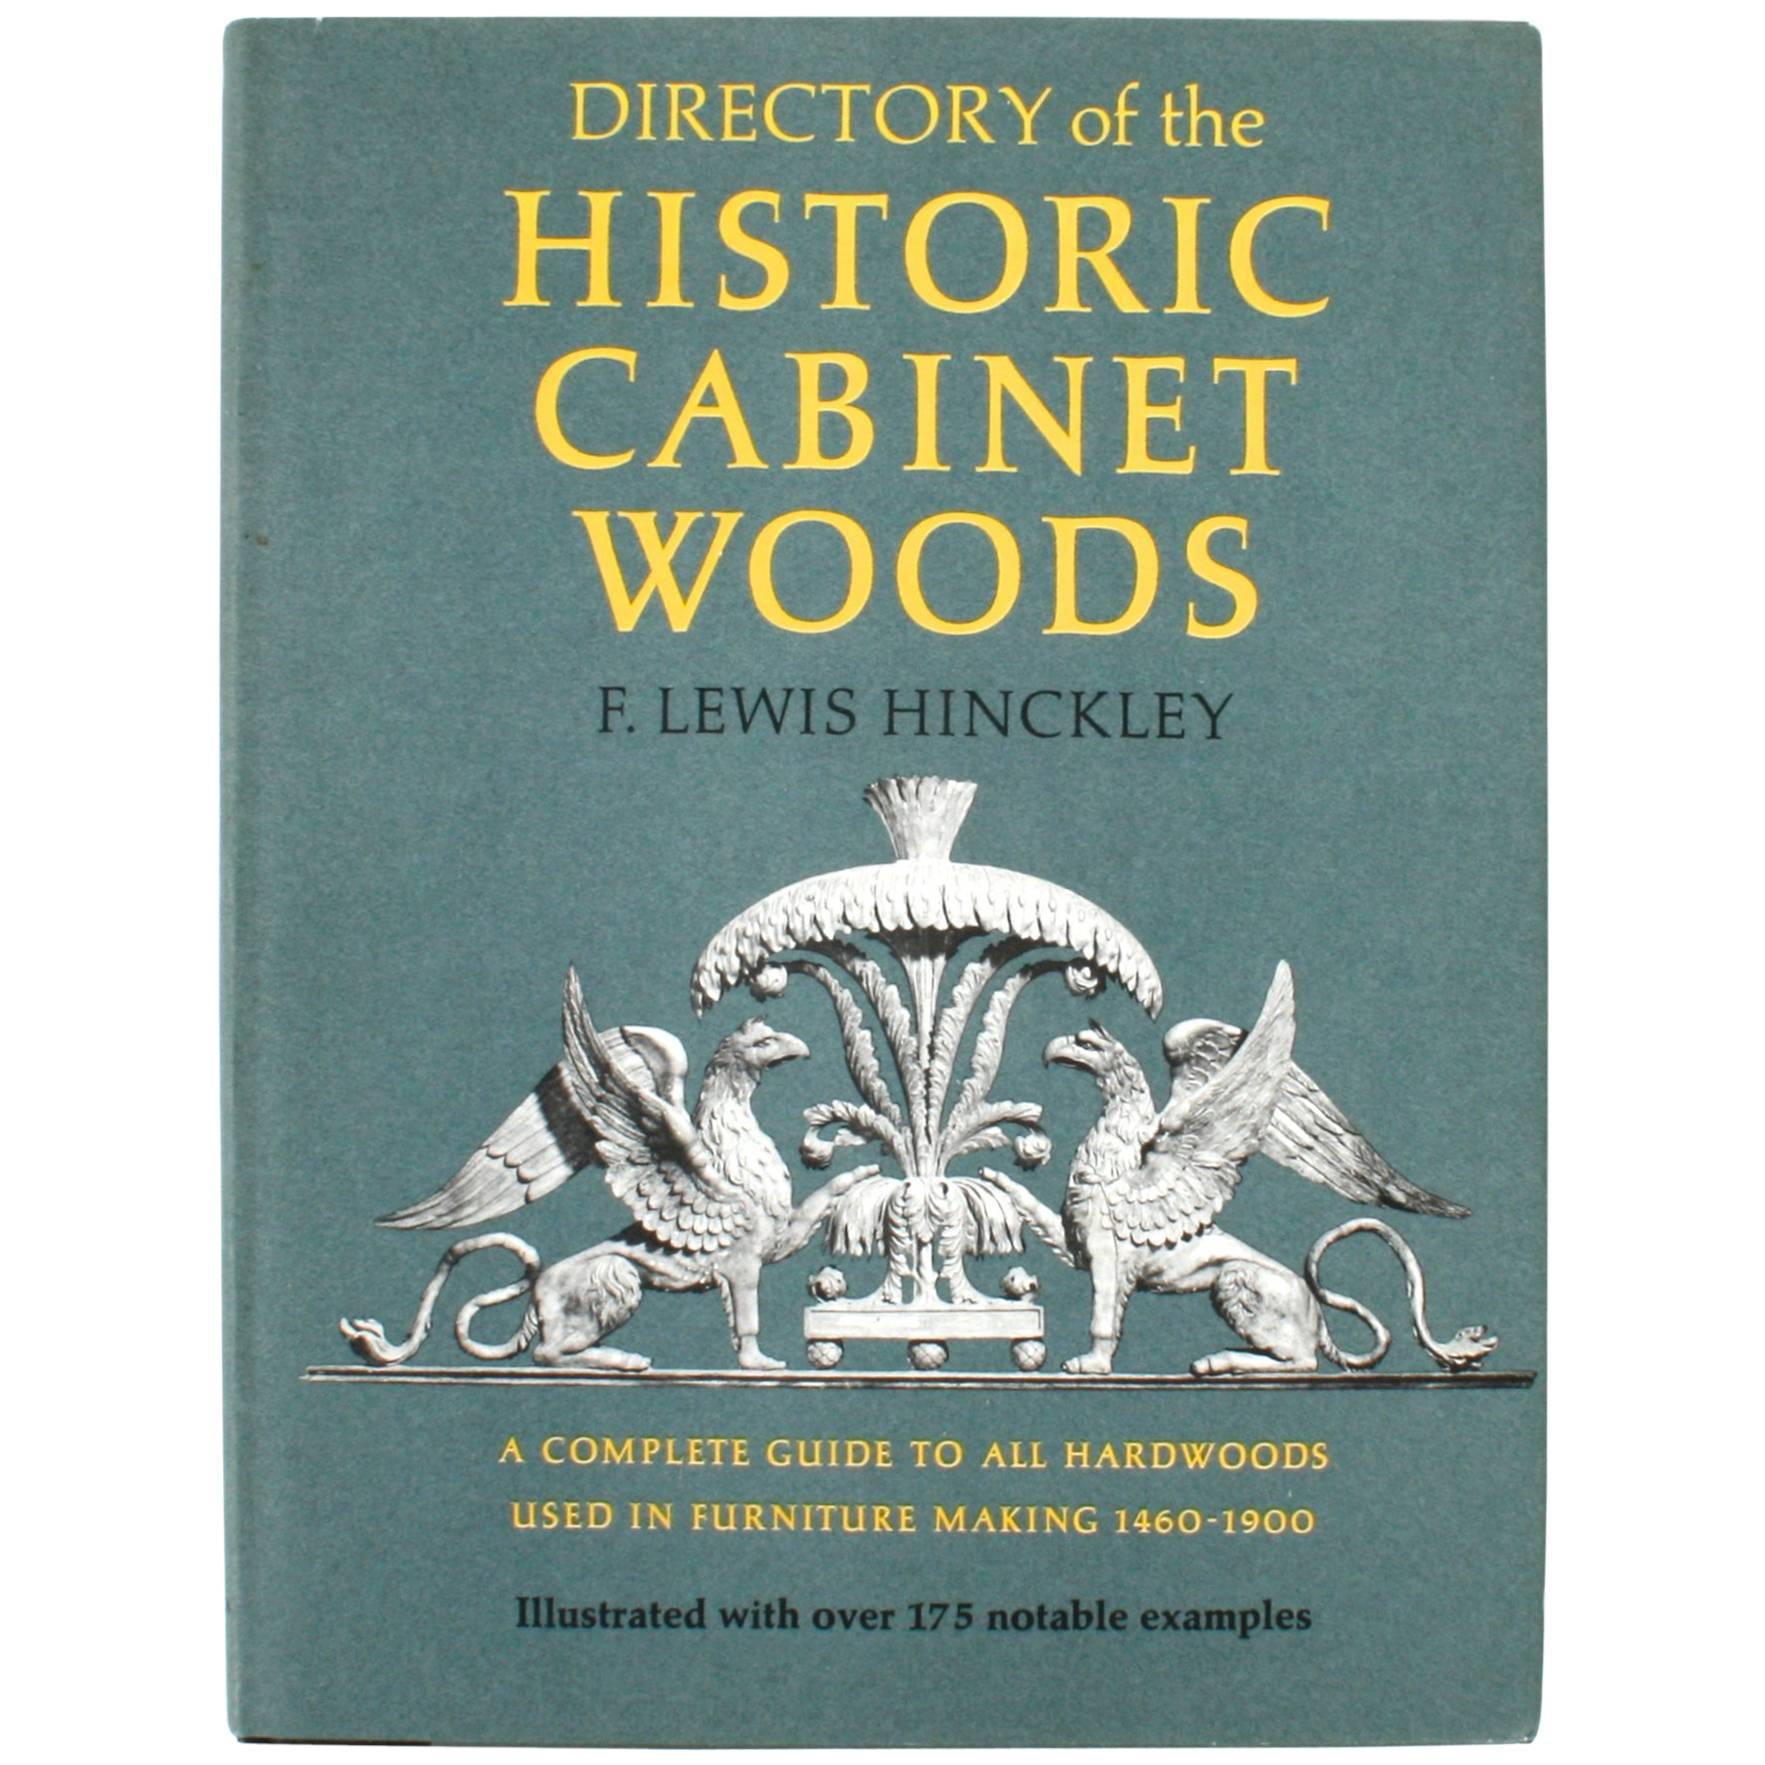 Directory of the Historic Cabinet Woods by F. Lewis Hinckley, First Edition